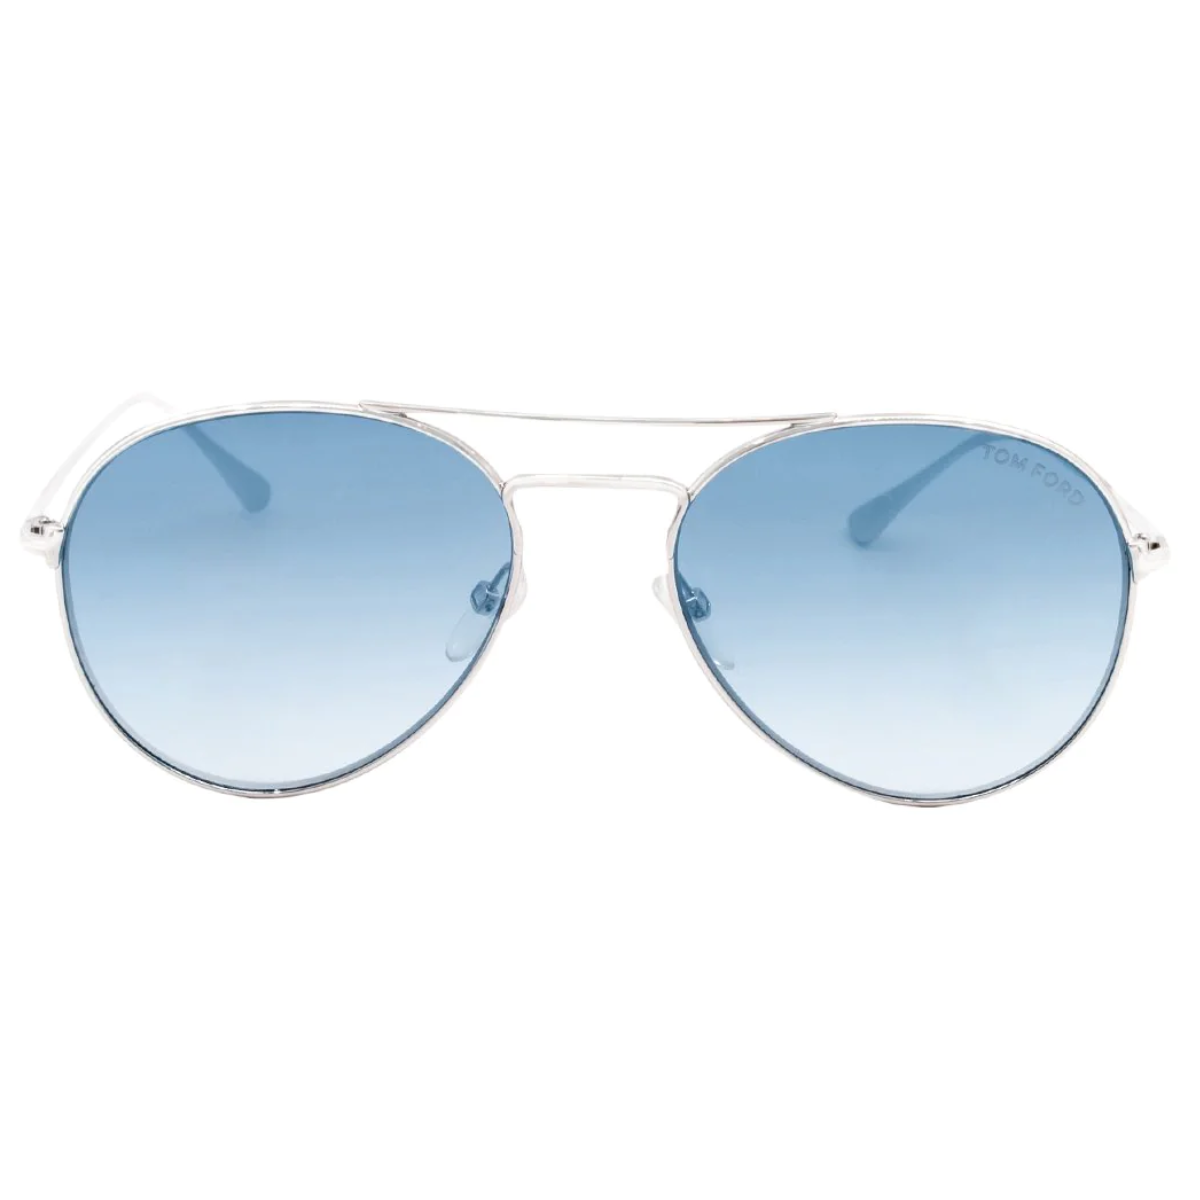 "Tom Ford 551 sunglasses for women displayed, featuring a metal frame in silver, aviator shape, and blue gradient non-polarized lenses, embodying elegance and luxury."